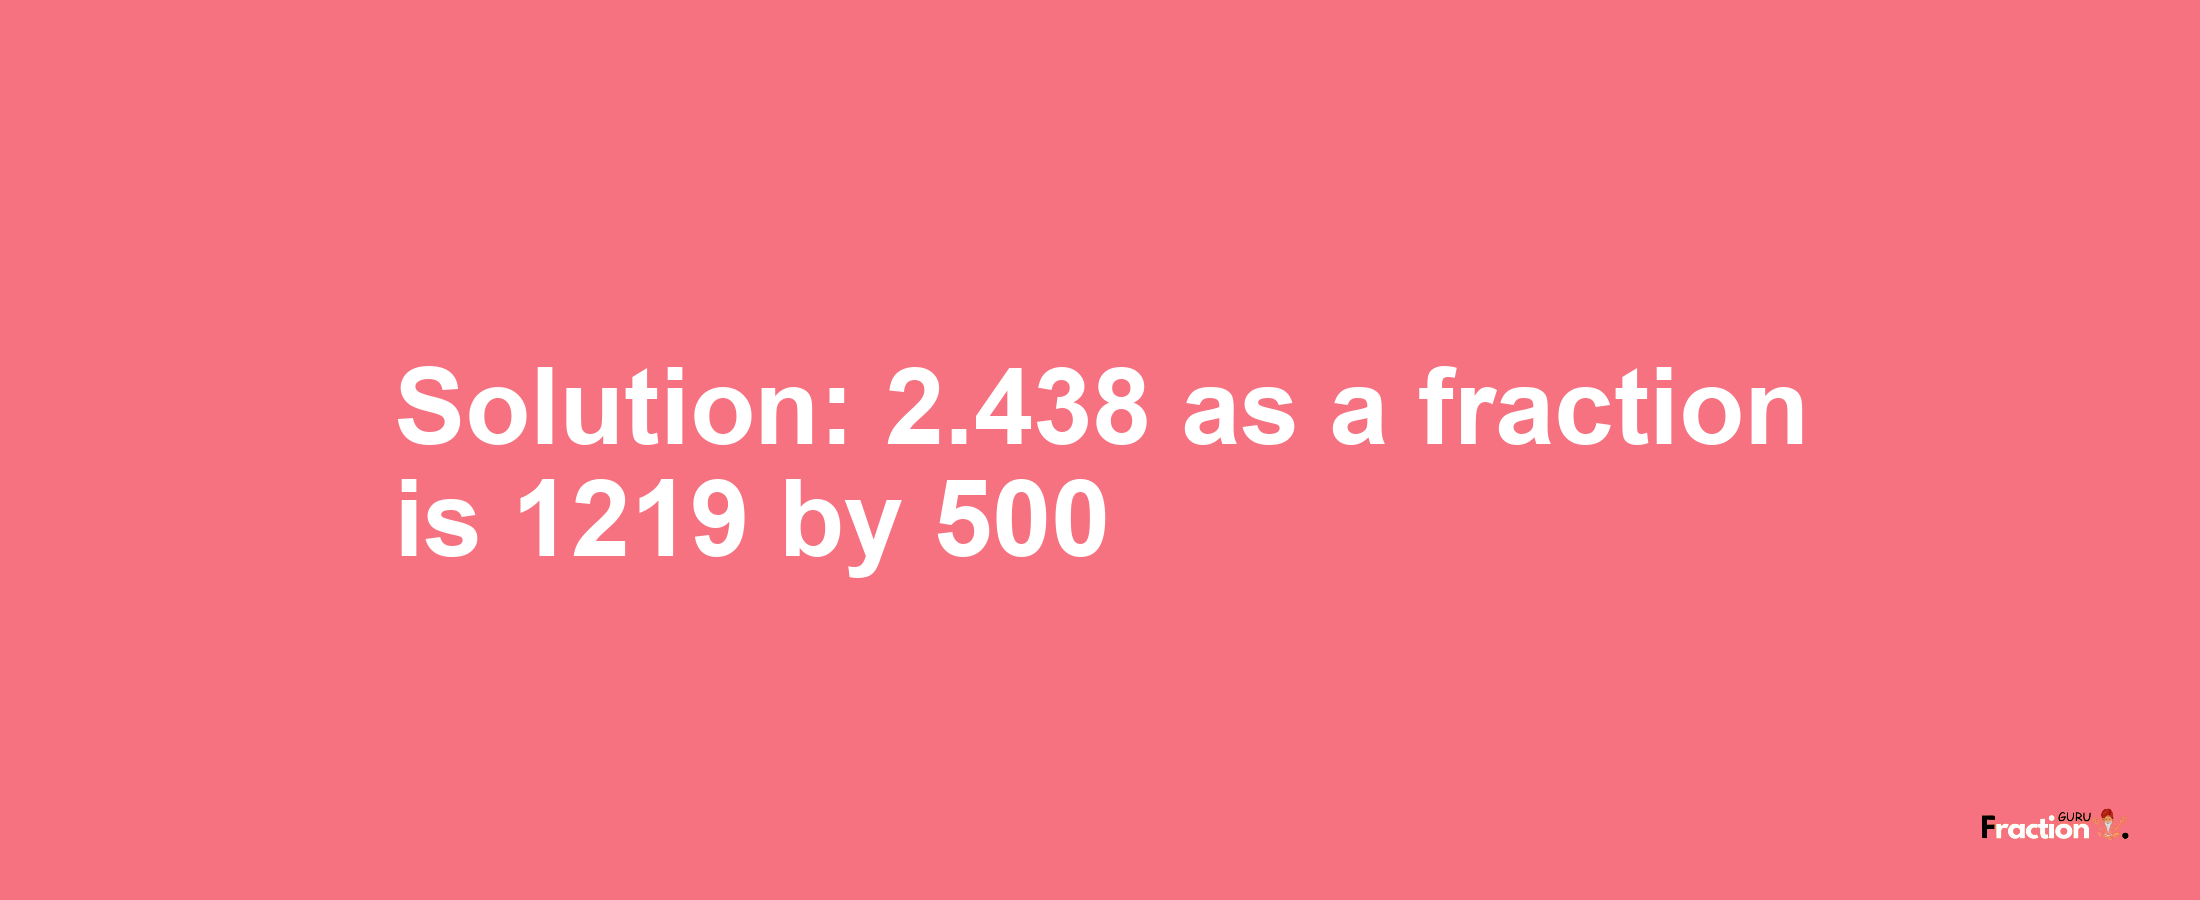 Solution:2.438 as a fraction is 1219/500